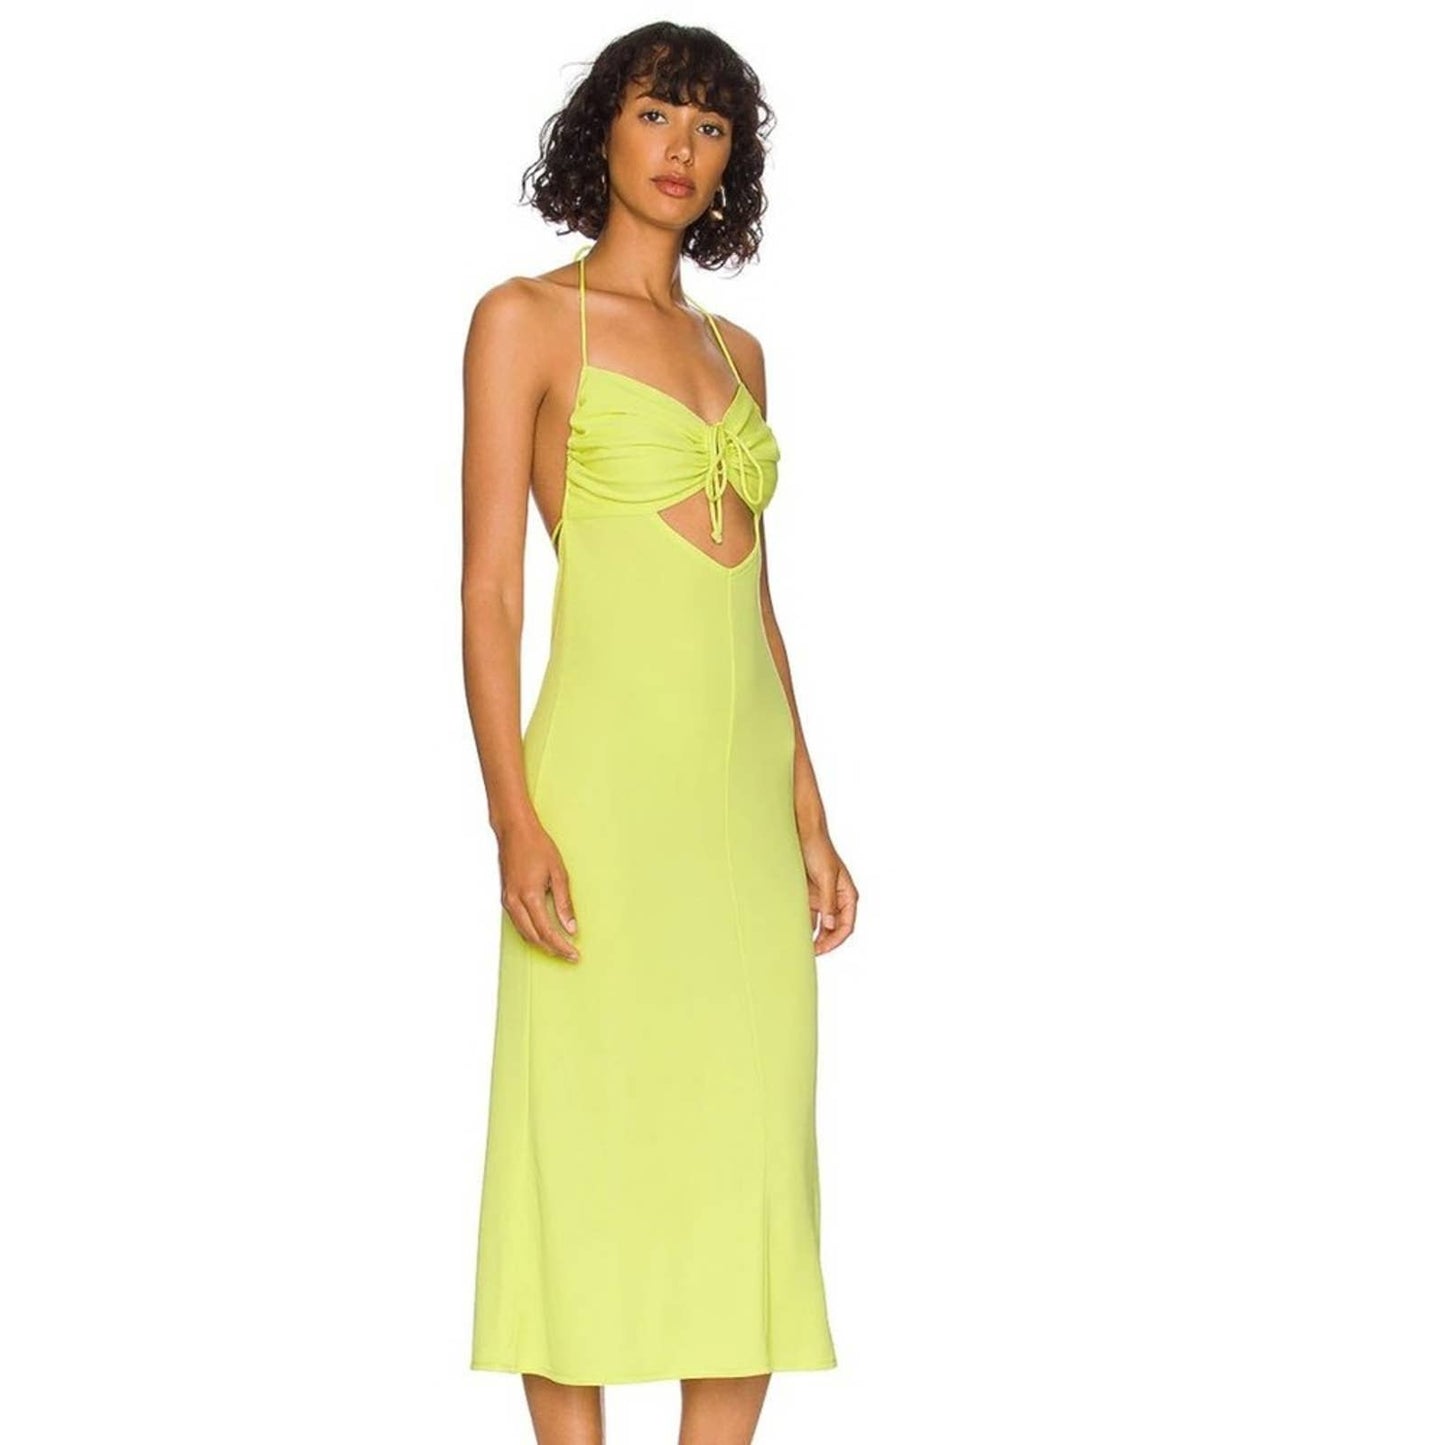 L'Academie Mira Midi Dress in Limelight NWOT Size Small